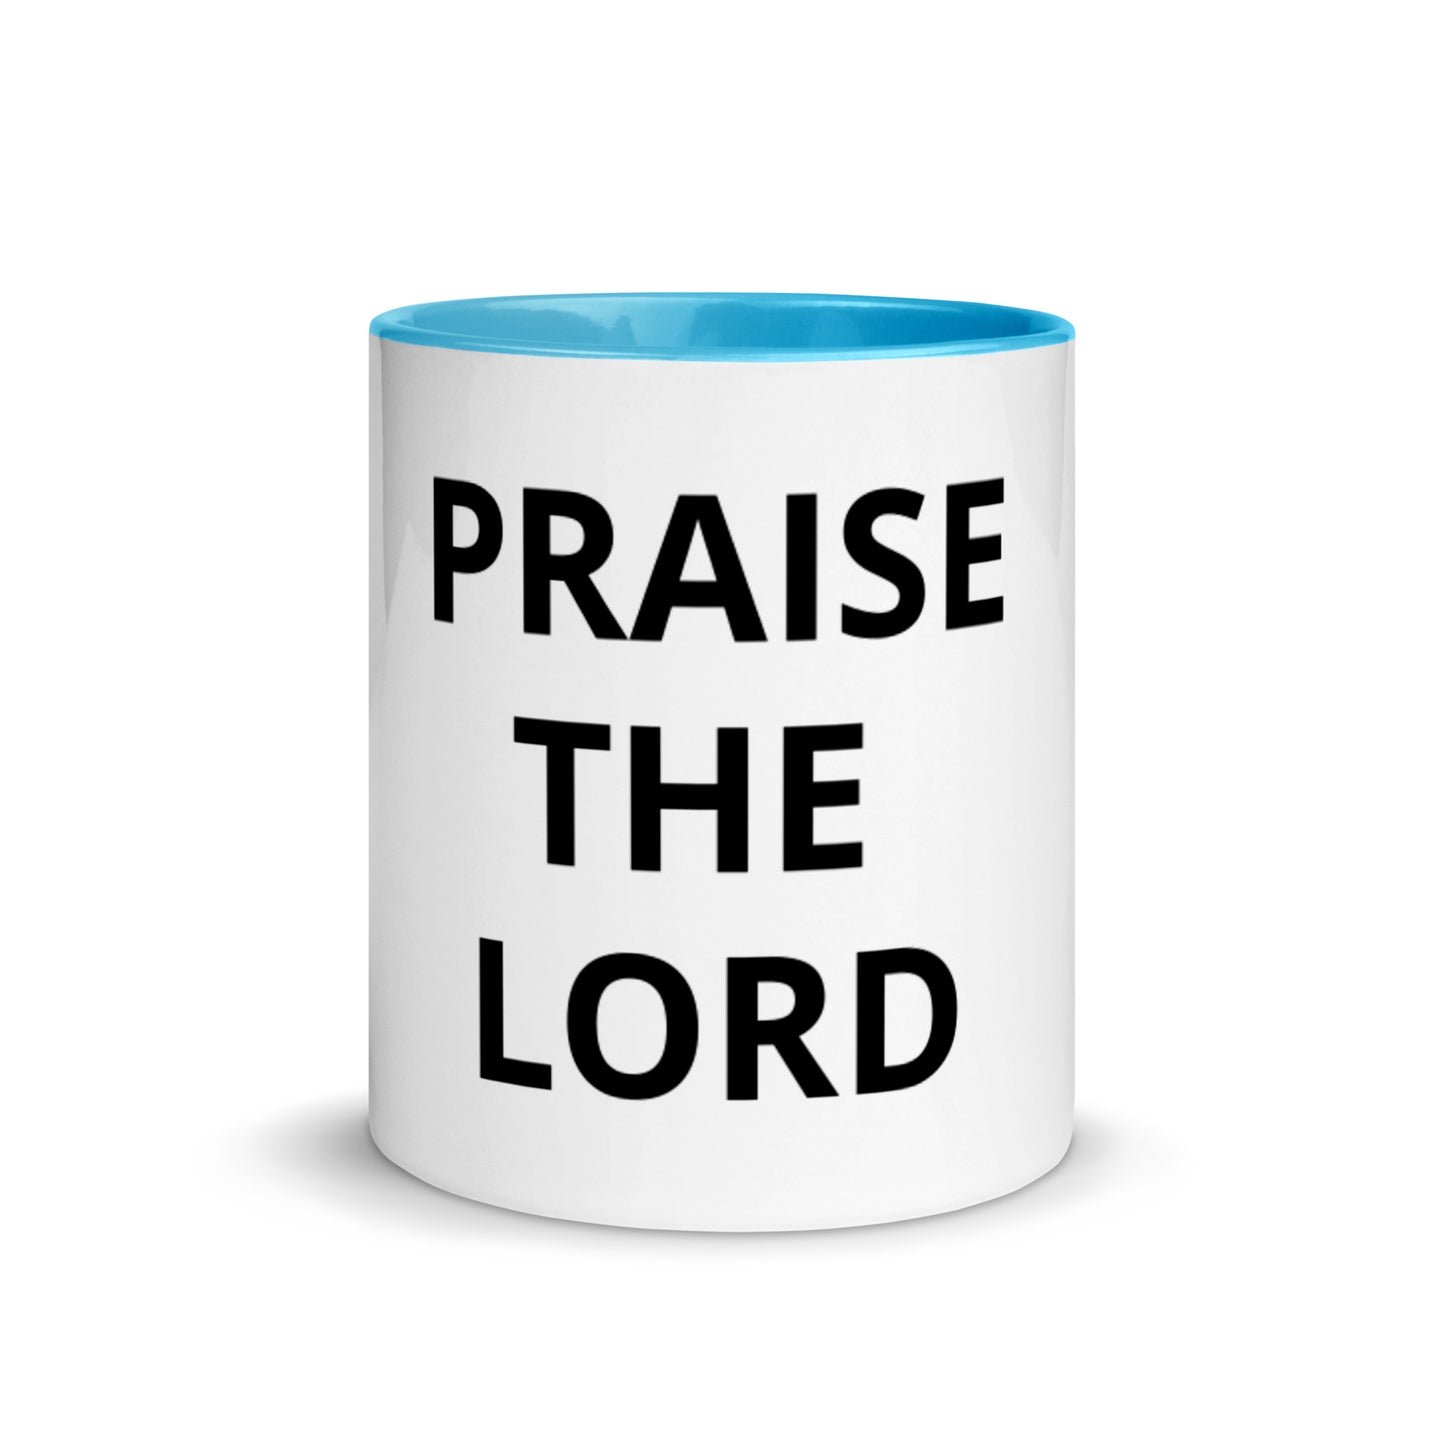 Praise The Lord White Ceramic Mug with Color Inside